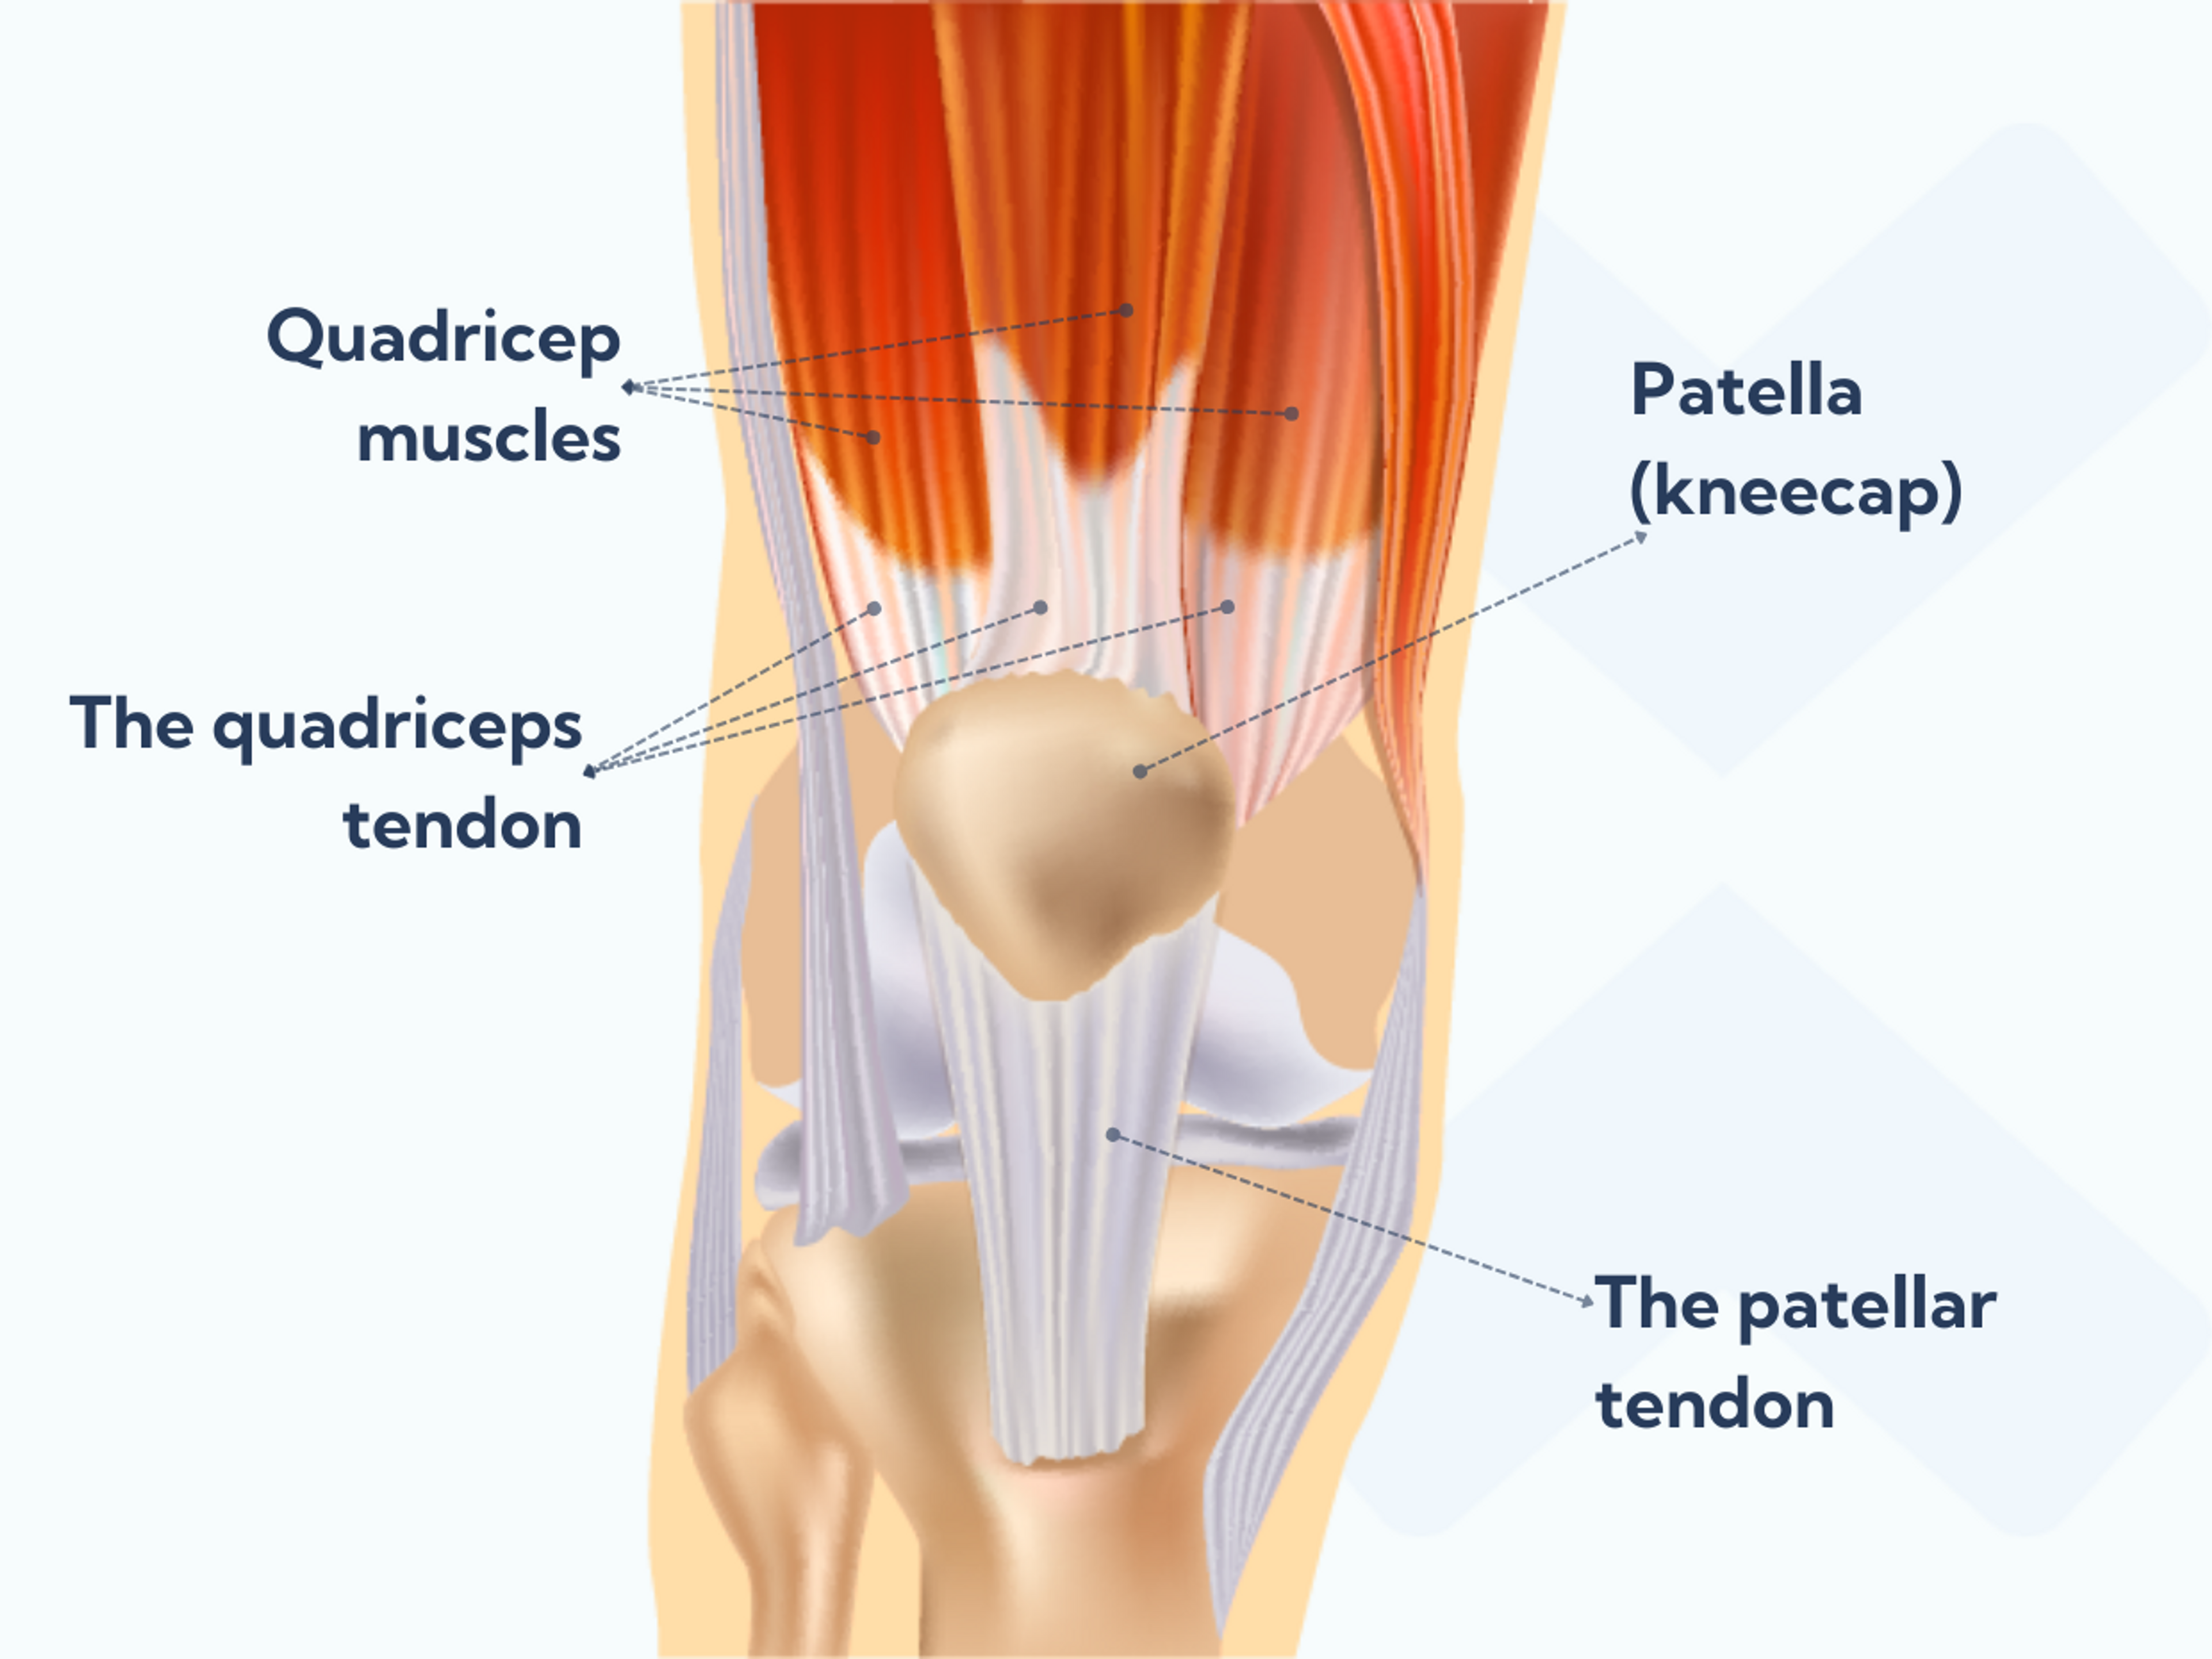 Anatomy of the quad muscles and quadriceps tendon.